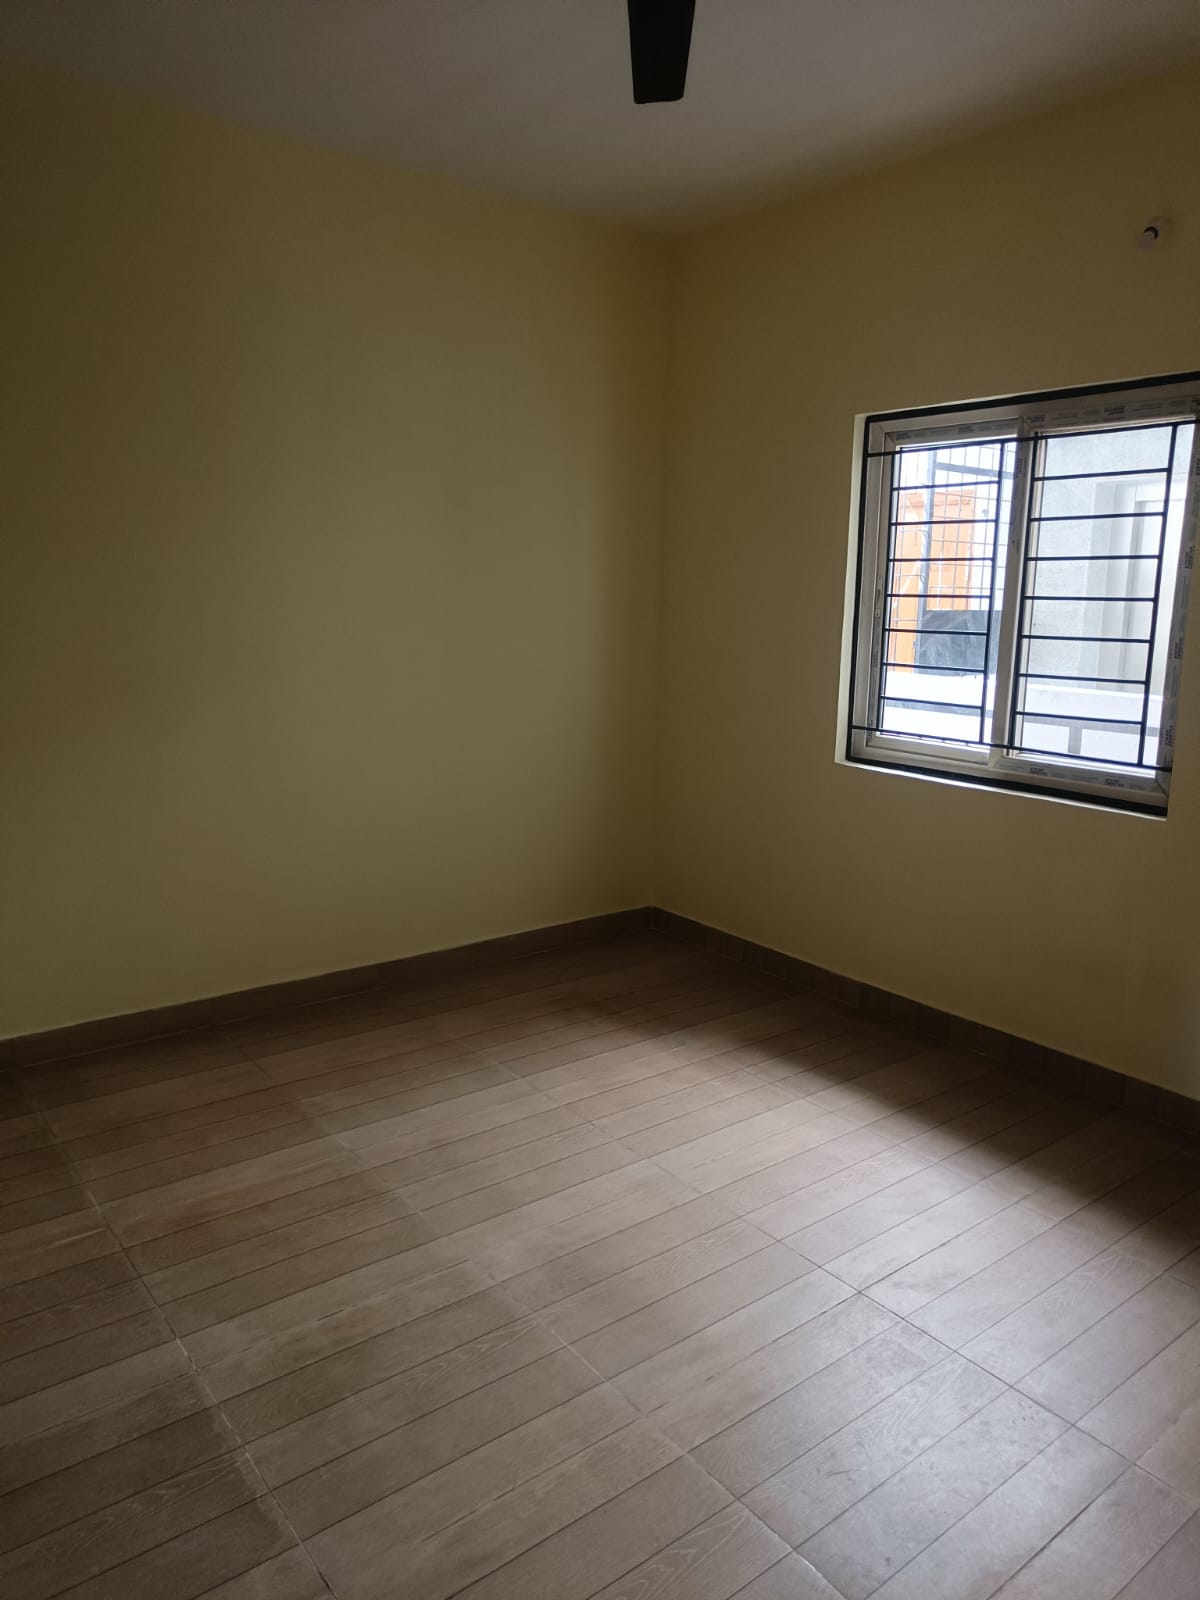 2 BHK Residential Apartment for Lease Only at JAM-5933 in Kengeri